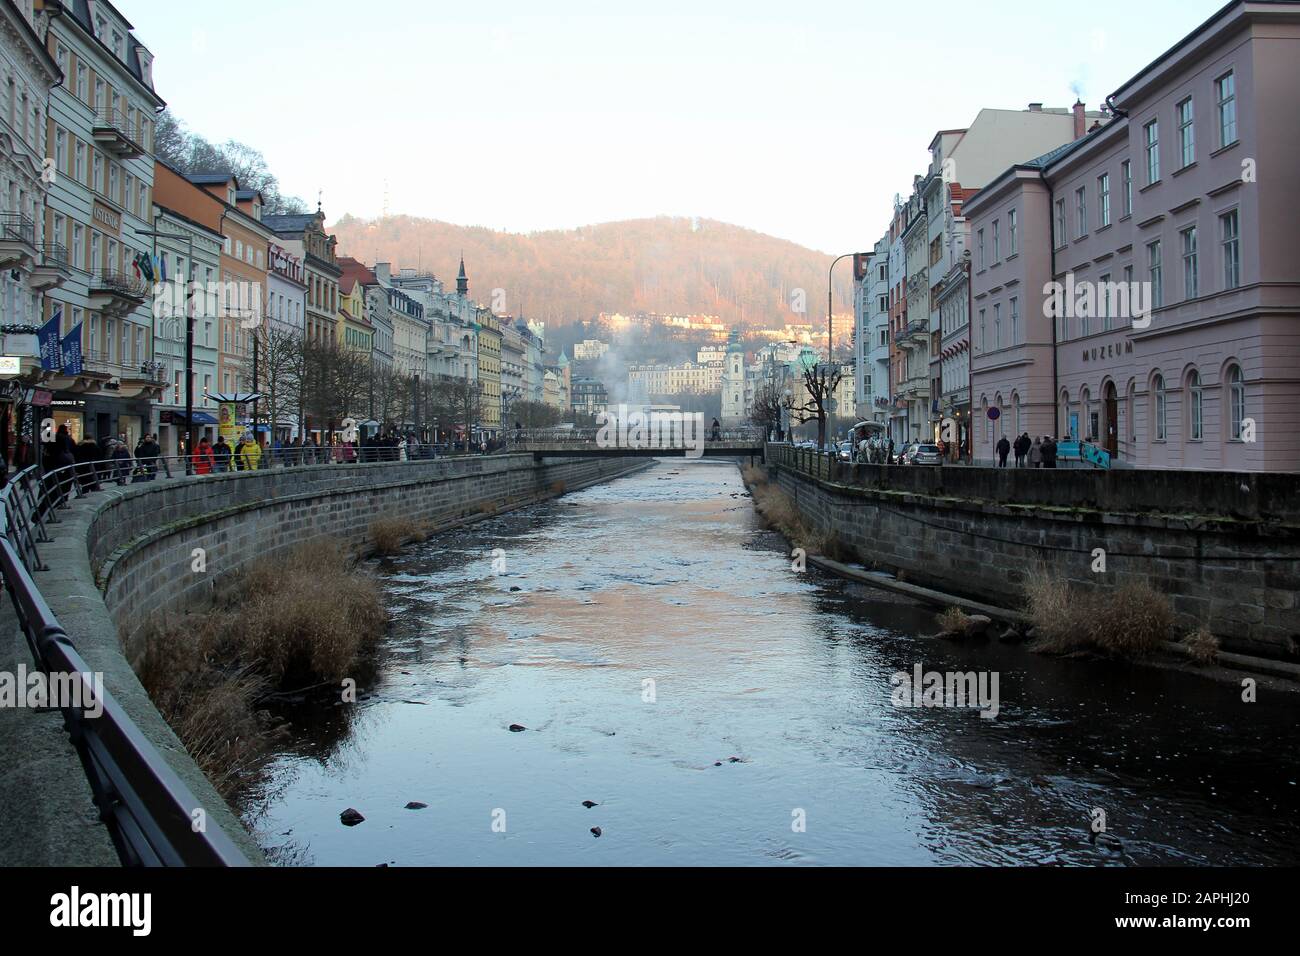 The Tepla River in the resort area, Karlovy Vary, Czech Republic Stock Photo